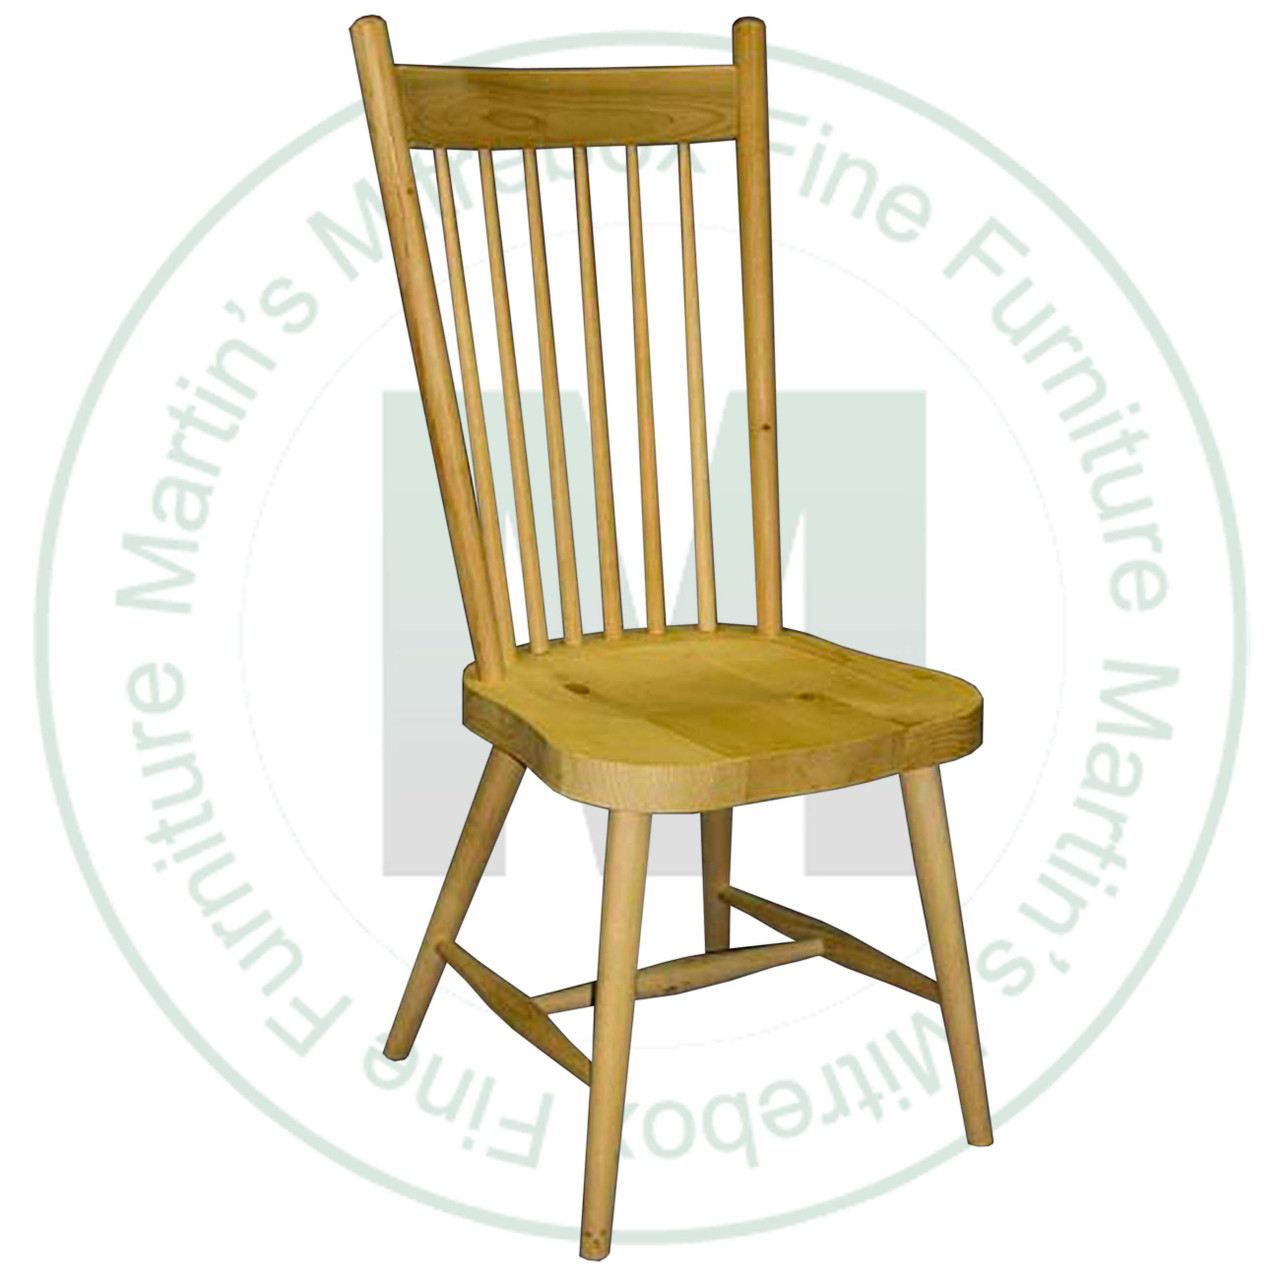 Maple Rustic Farm House Side Chair With Wood Seat